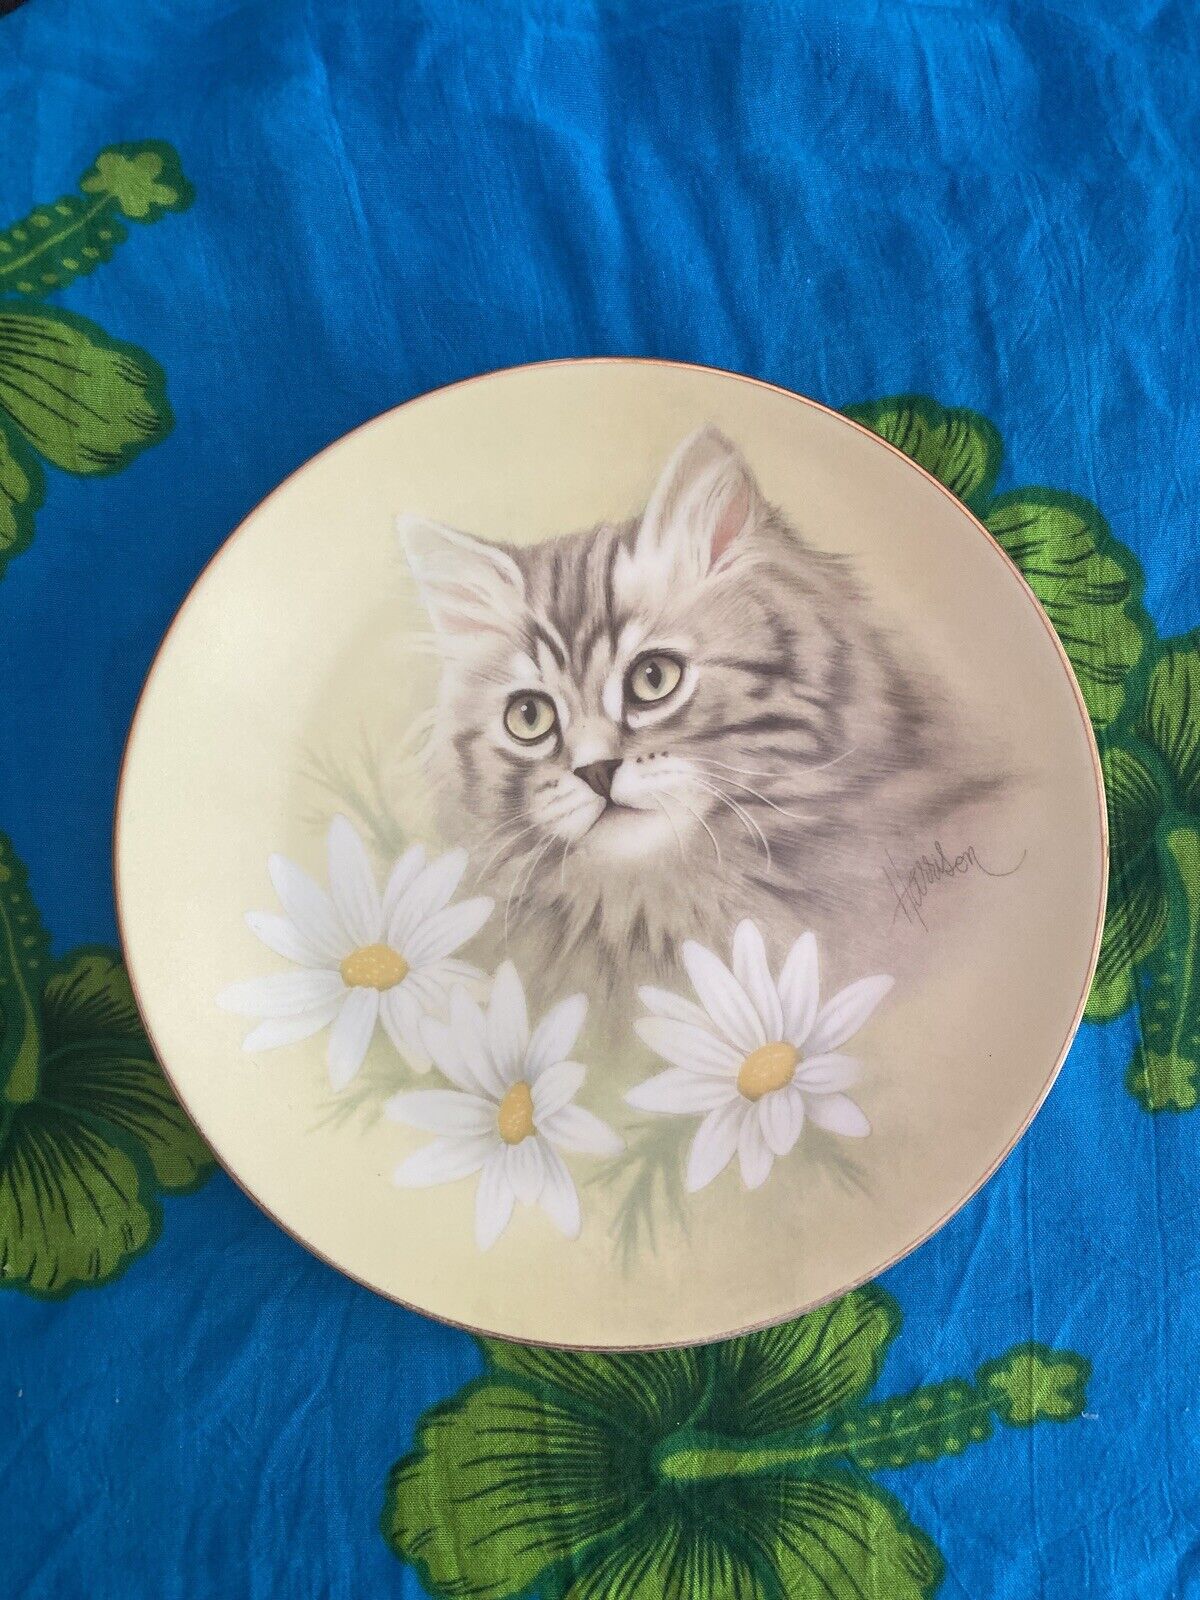 Spring Fever, Bob Harrison, Petals and Purrs Collection Hamilton Plate Cat 1988